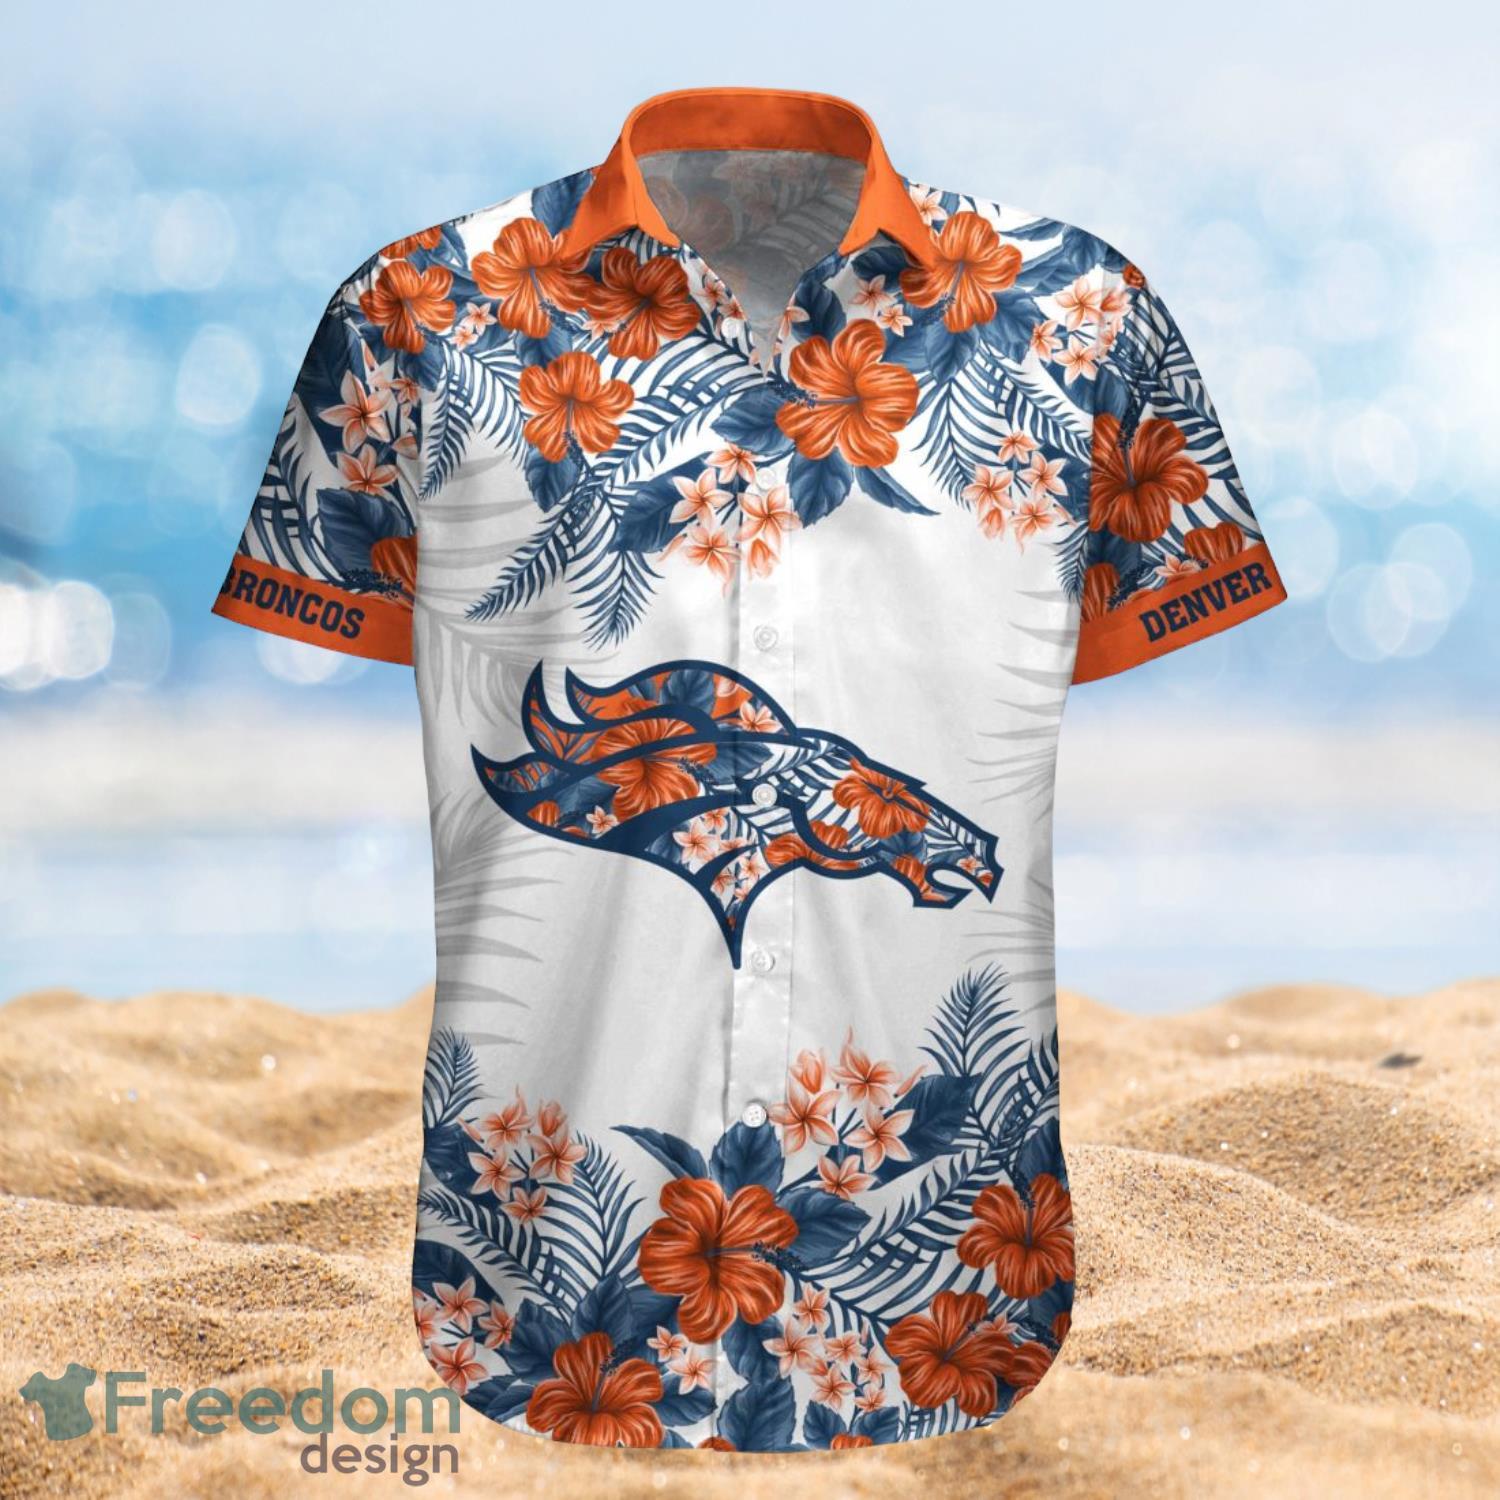 Denver Broncos Summer Beach Shirt and Shorts Full Over Print Product Photo 1